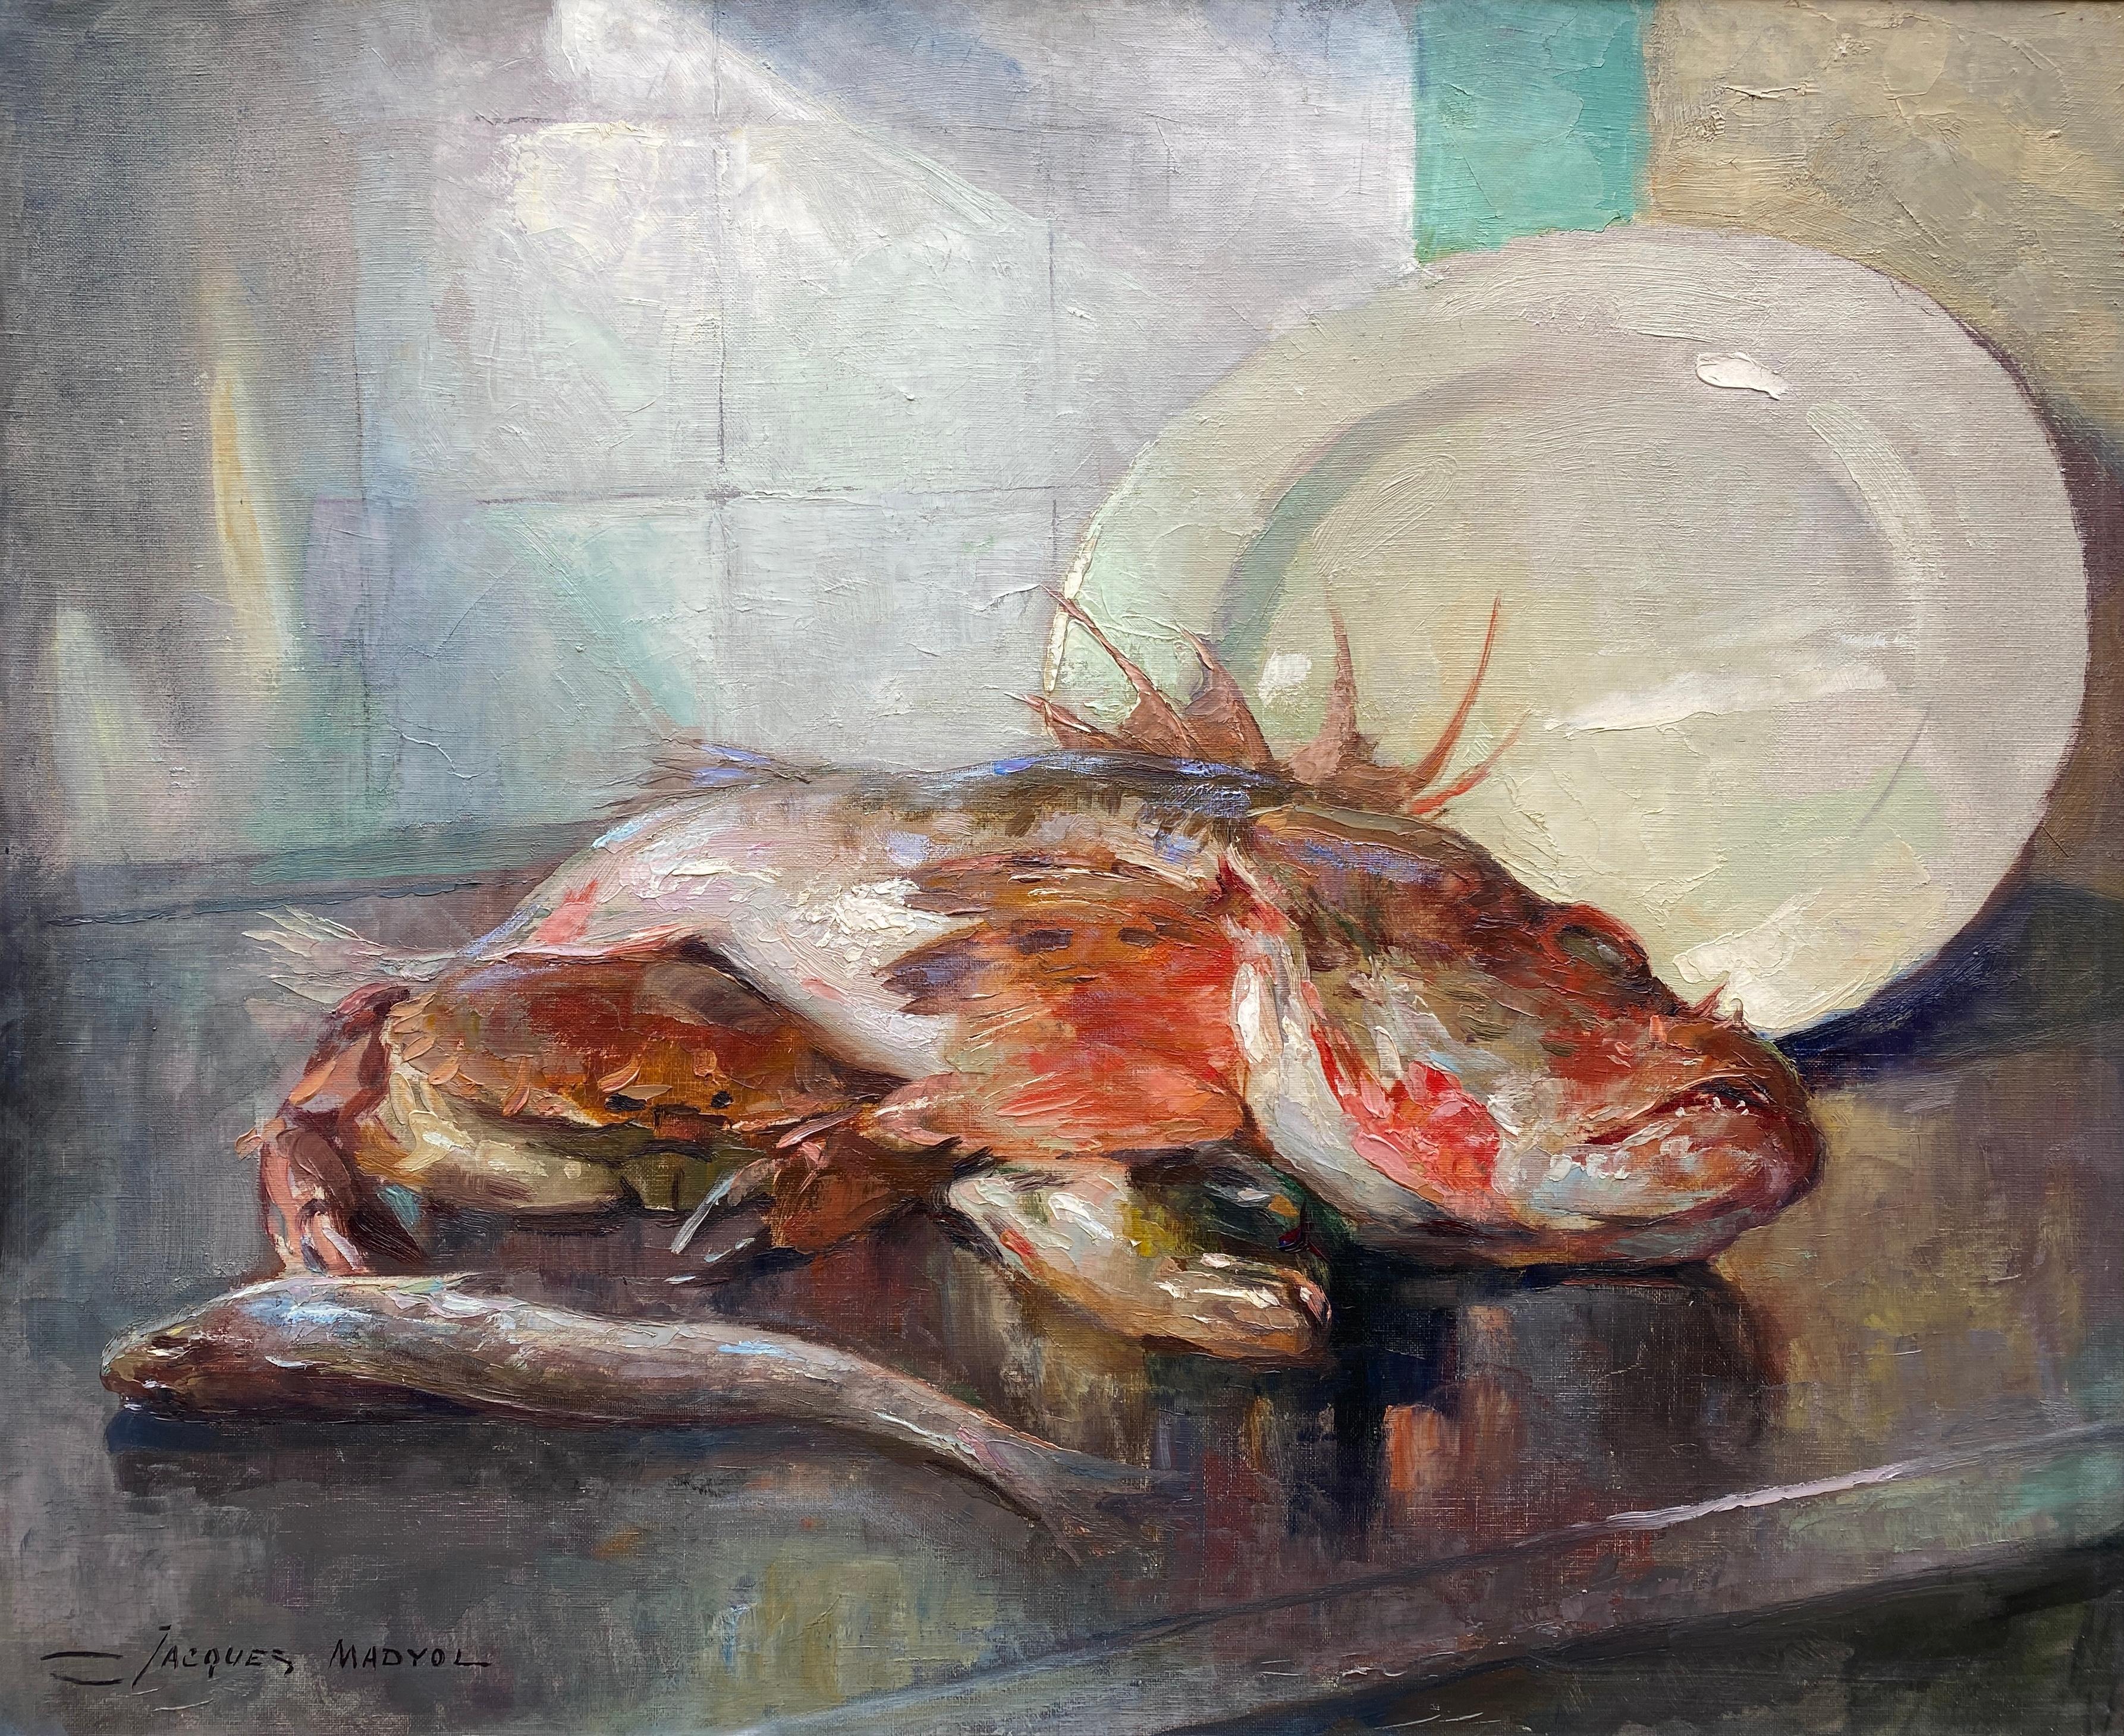 A Scorpionfish, Jacques Madyol, Brussels 1871 – 1950, Belgian Painter - Painting by Madyol Jacques